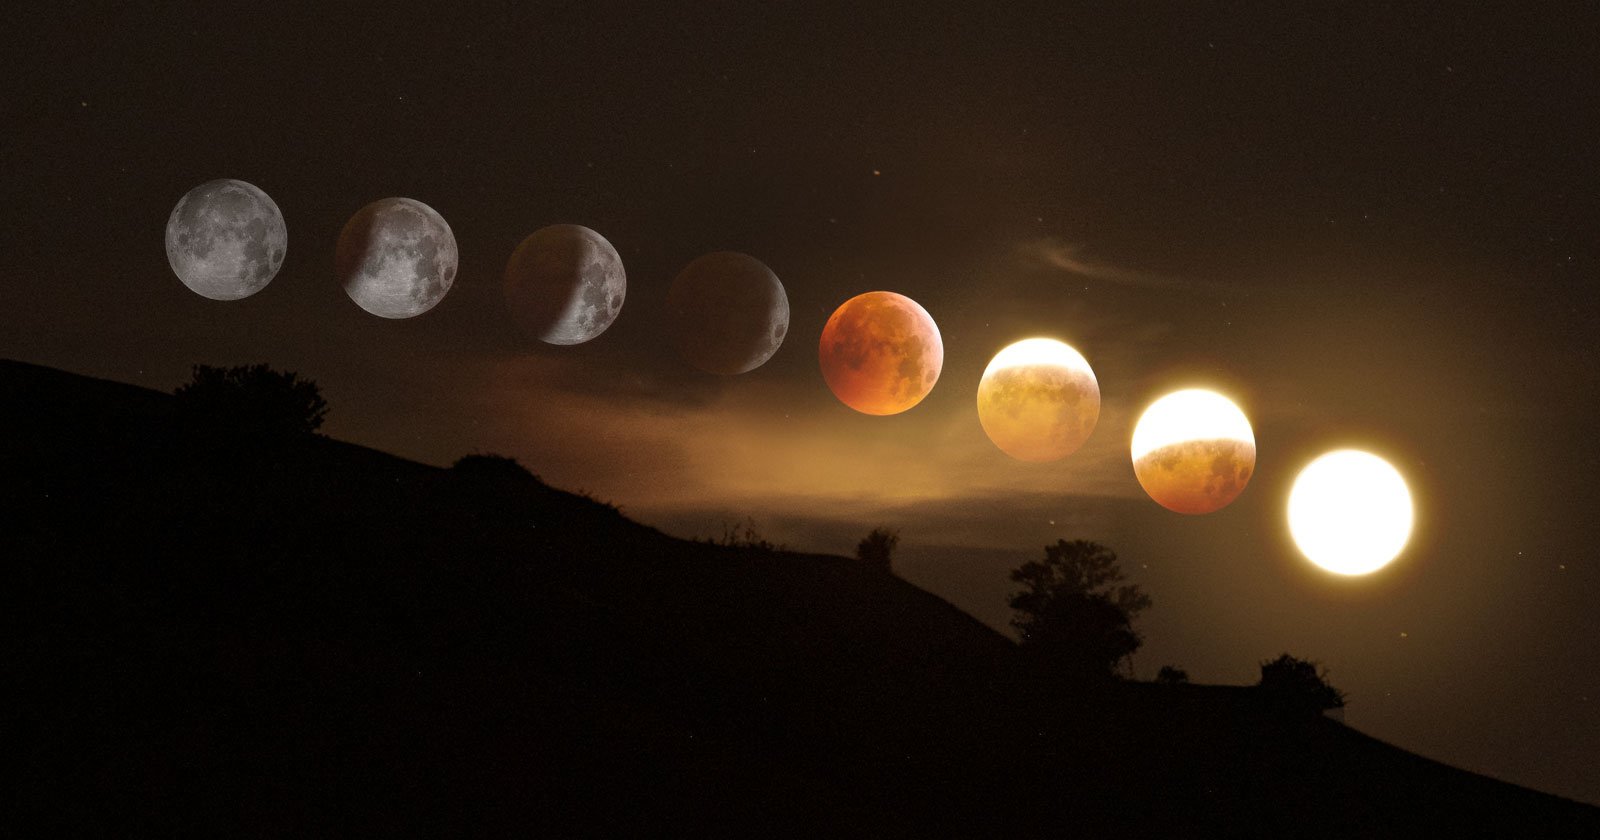 Lunar eclipse composite image over silhouetted hill with trees